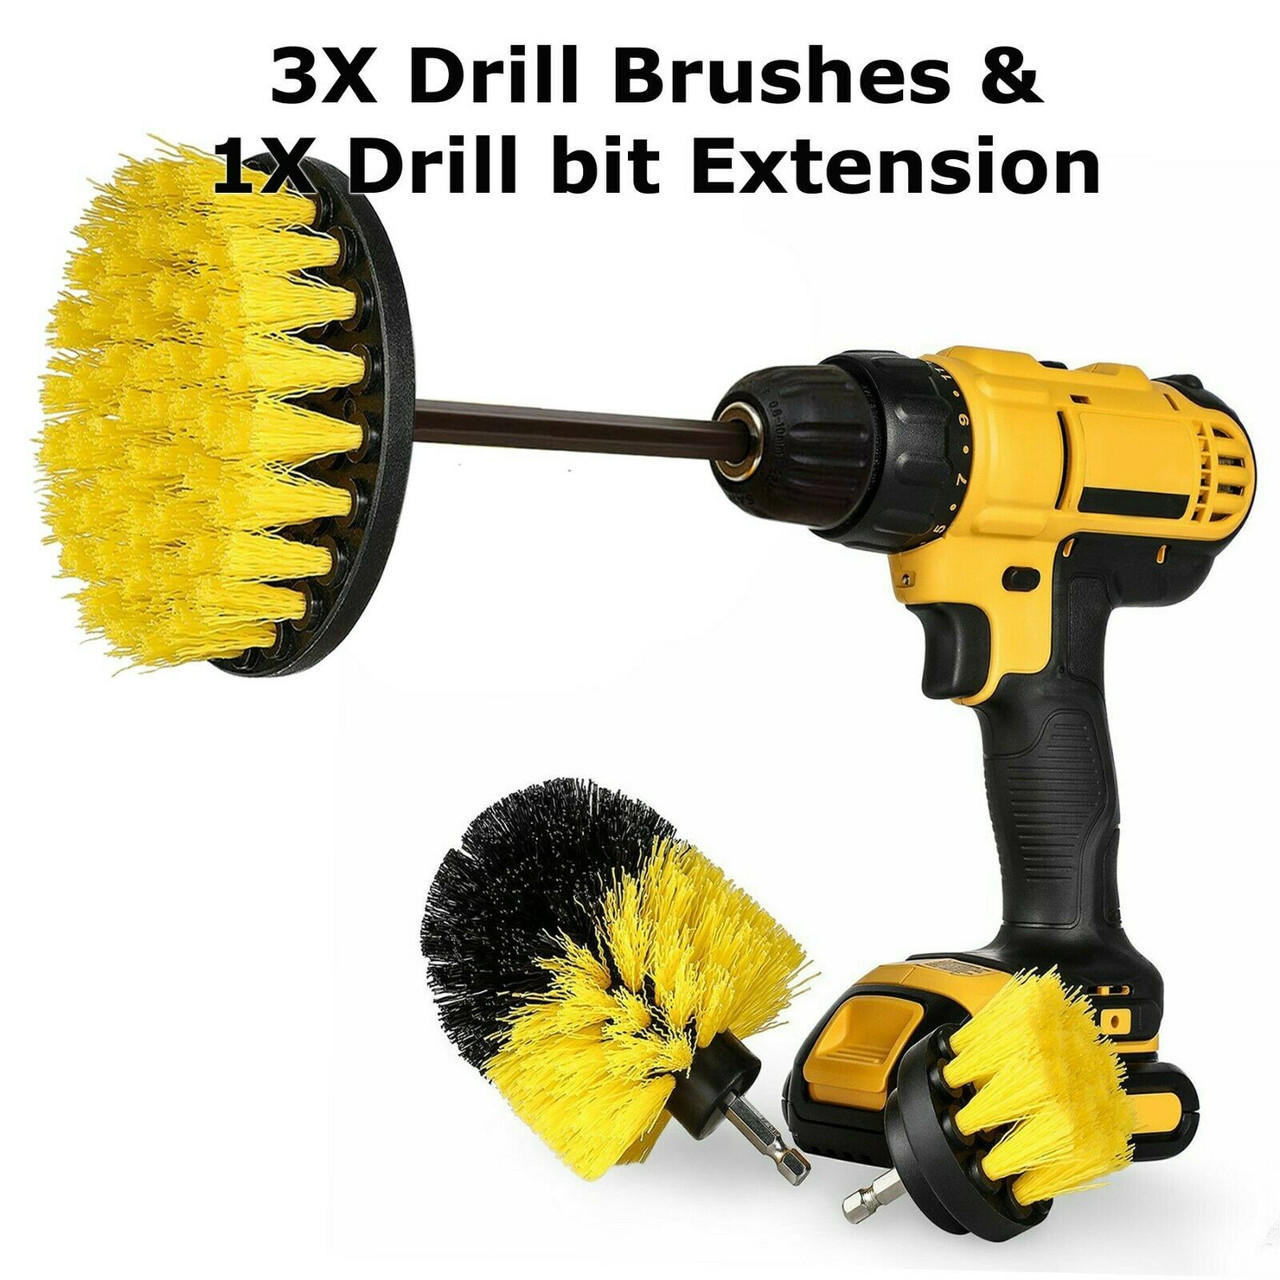 https://cdn11.bigcommerce.com/s-zrh8tkpr8d/images/stencil/1280x1280/products/9941/34977/4pcs-home-drill-brush-attachment-power-scrubber-car-cleaning-kit-combo-scrub-tub__01587.1665676353.jpg?c=2&imbypass=on